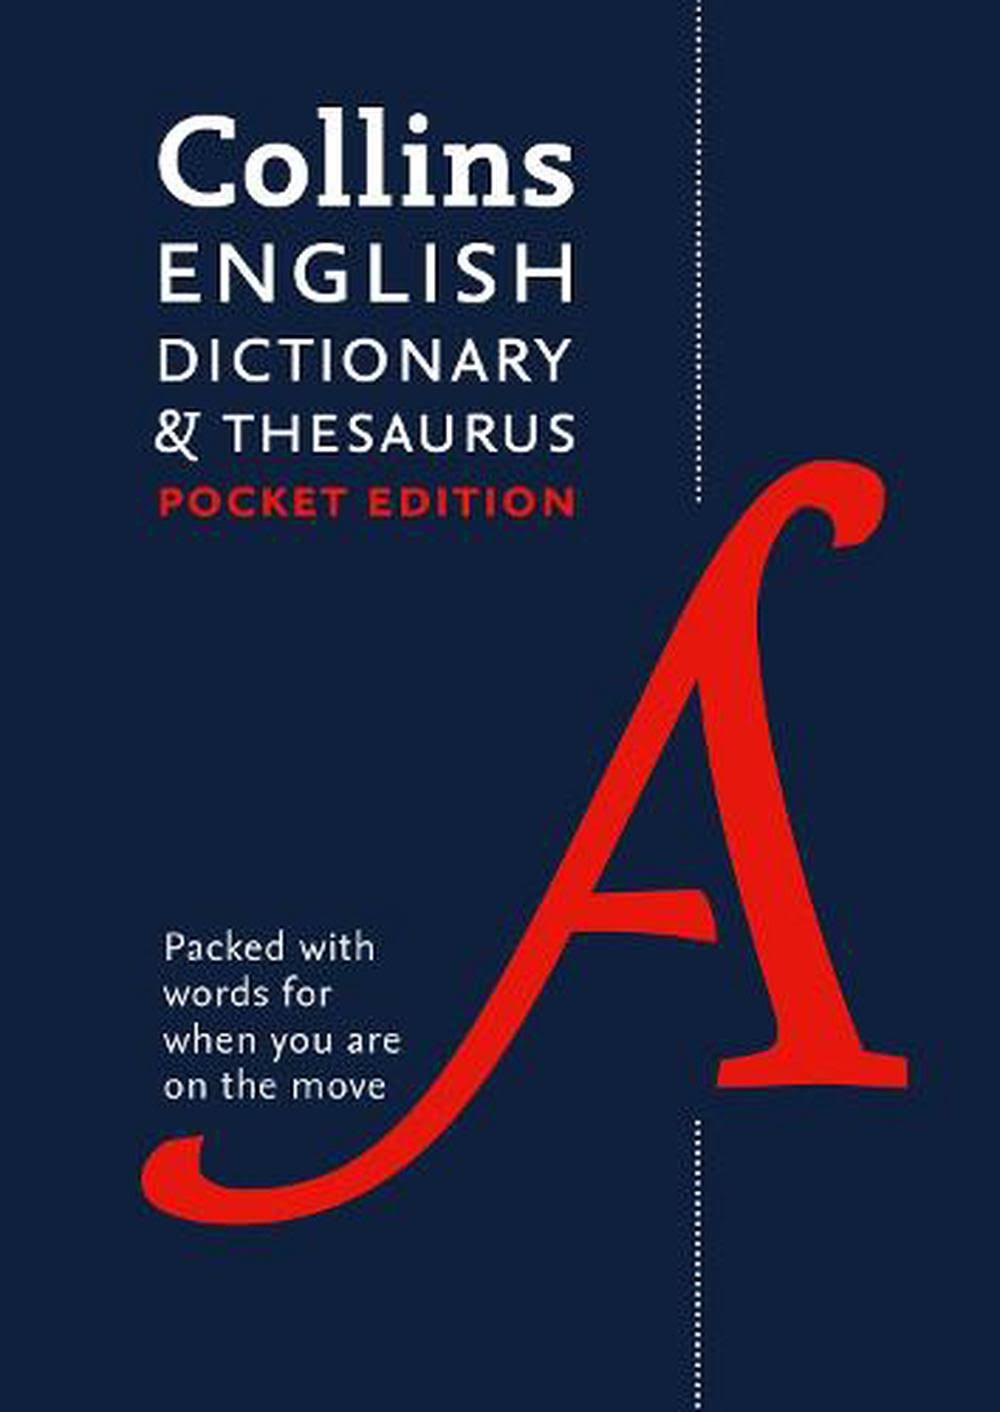 Collins English Dictionary and Thesaurus Pocket Edition